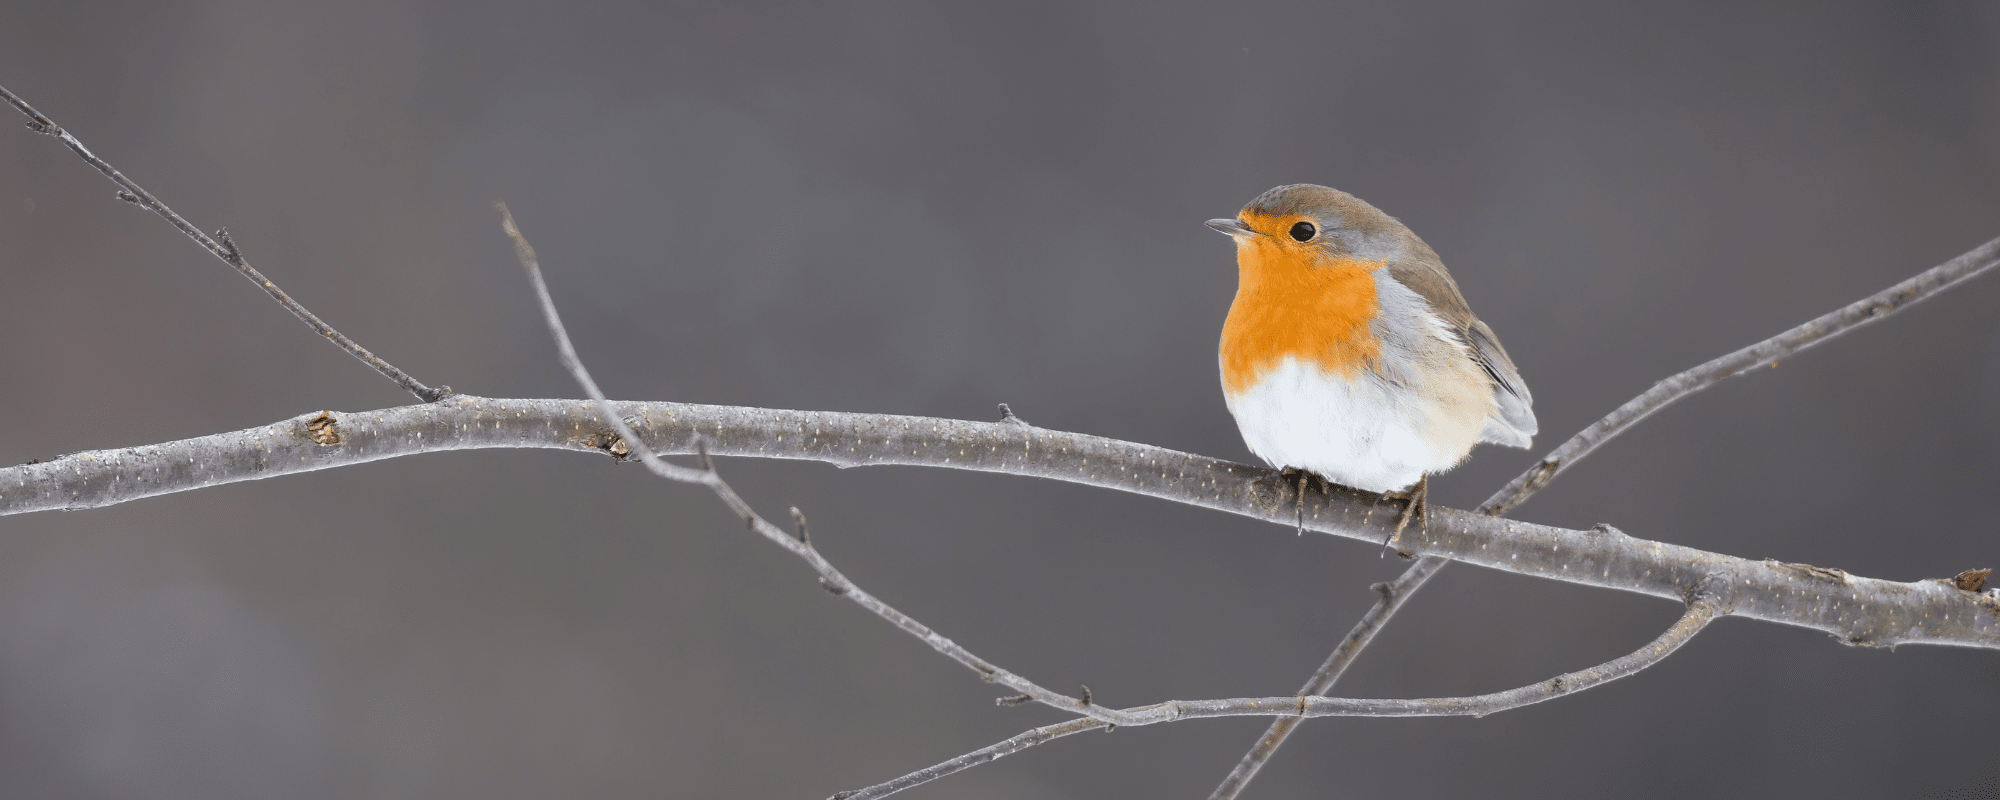 Robin perched on a winter branch